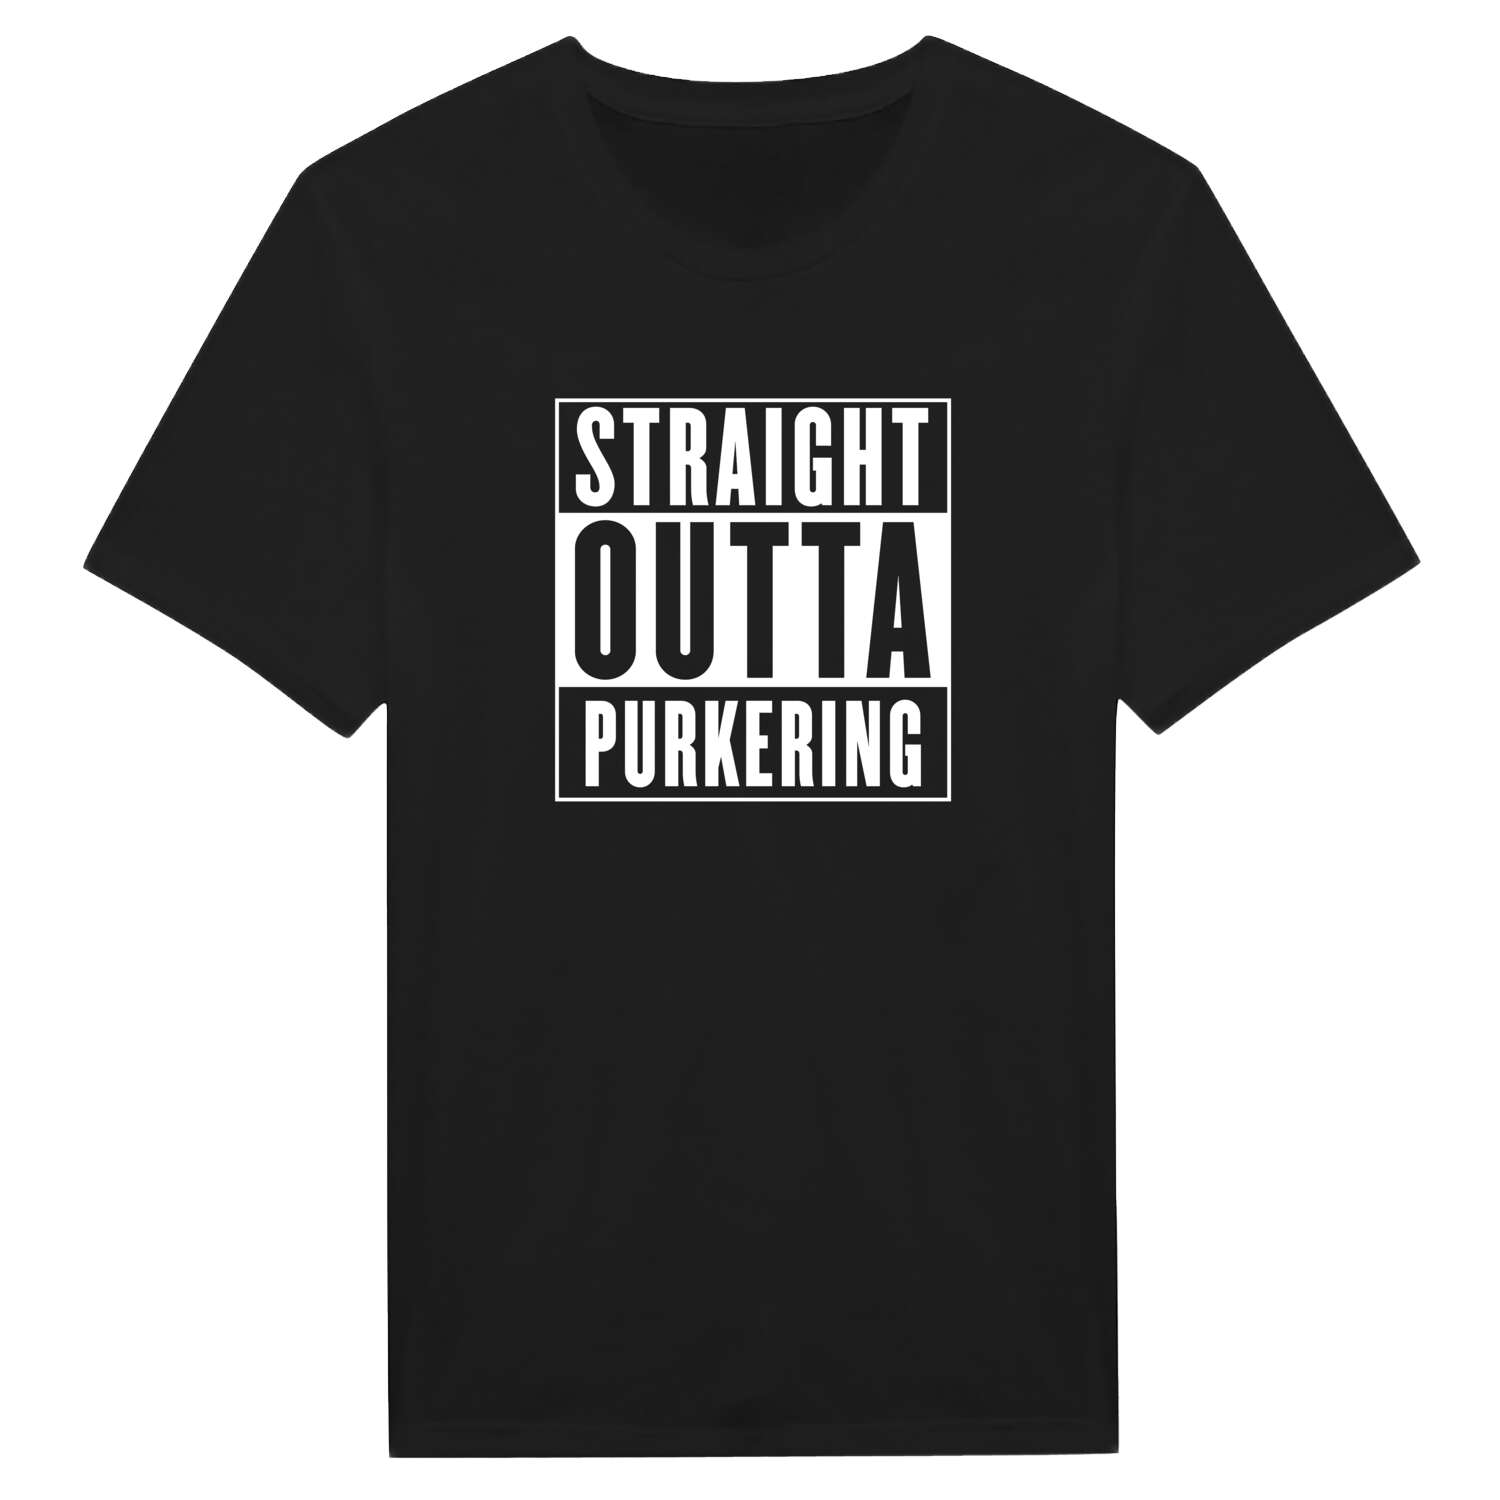 Purkering T-Shirt »Straight Outta«